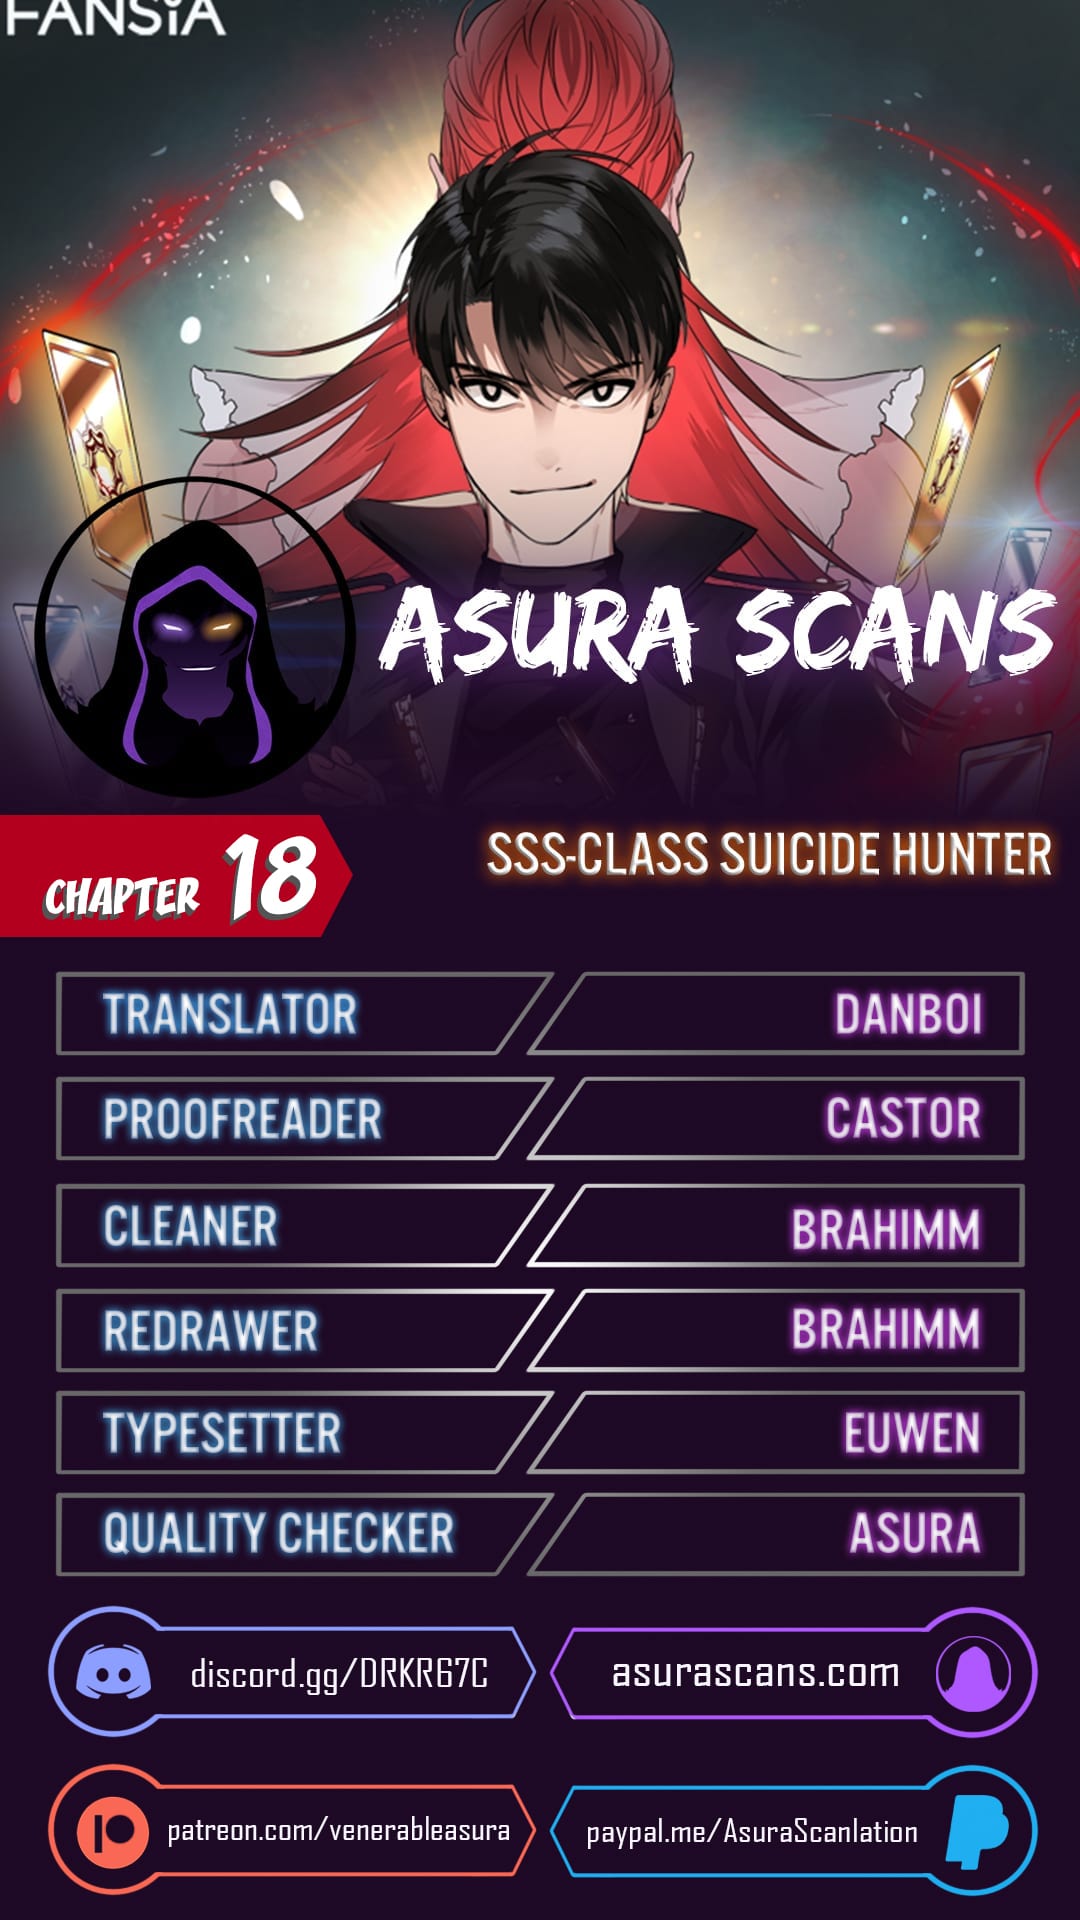 SSS-Class Suicide Hunter chapter 18